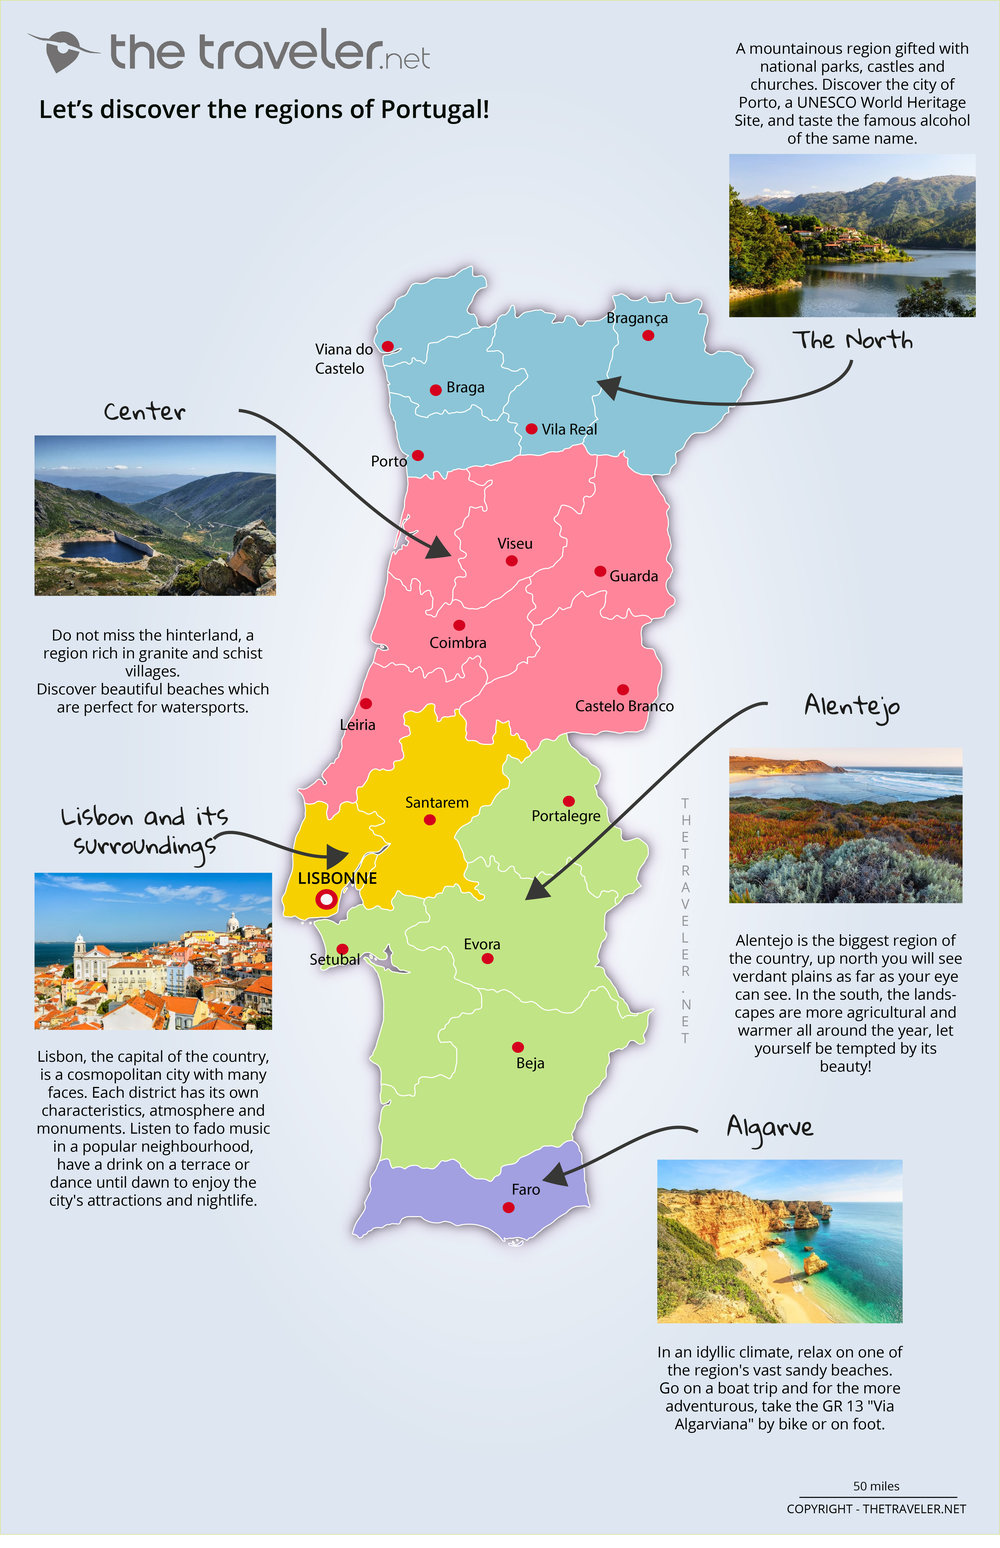 portugal tourism sector